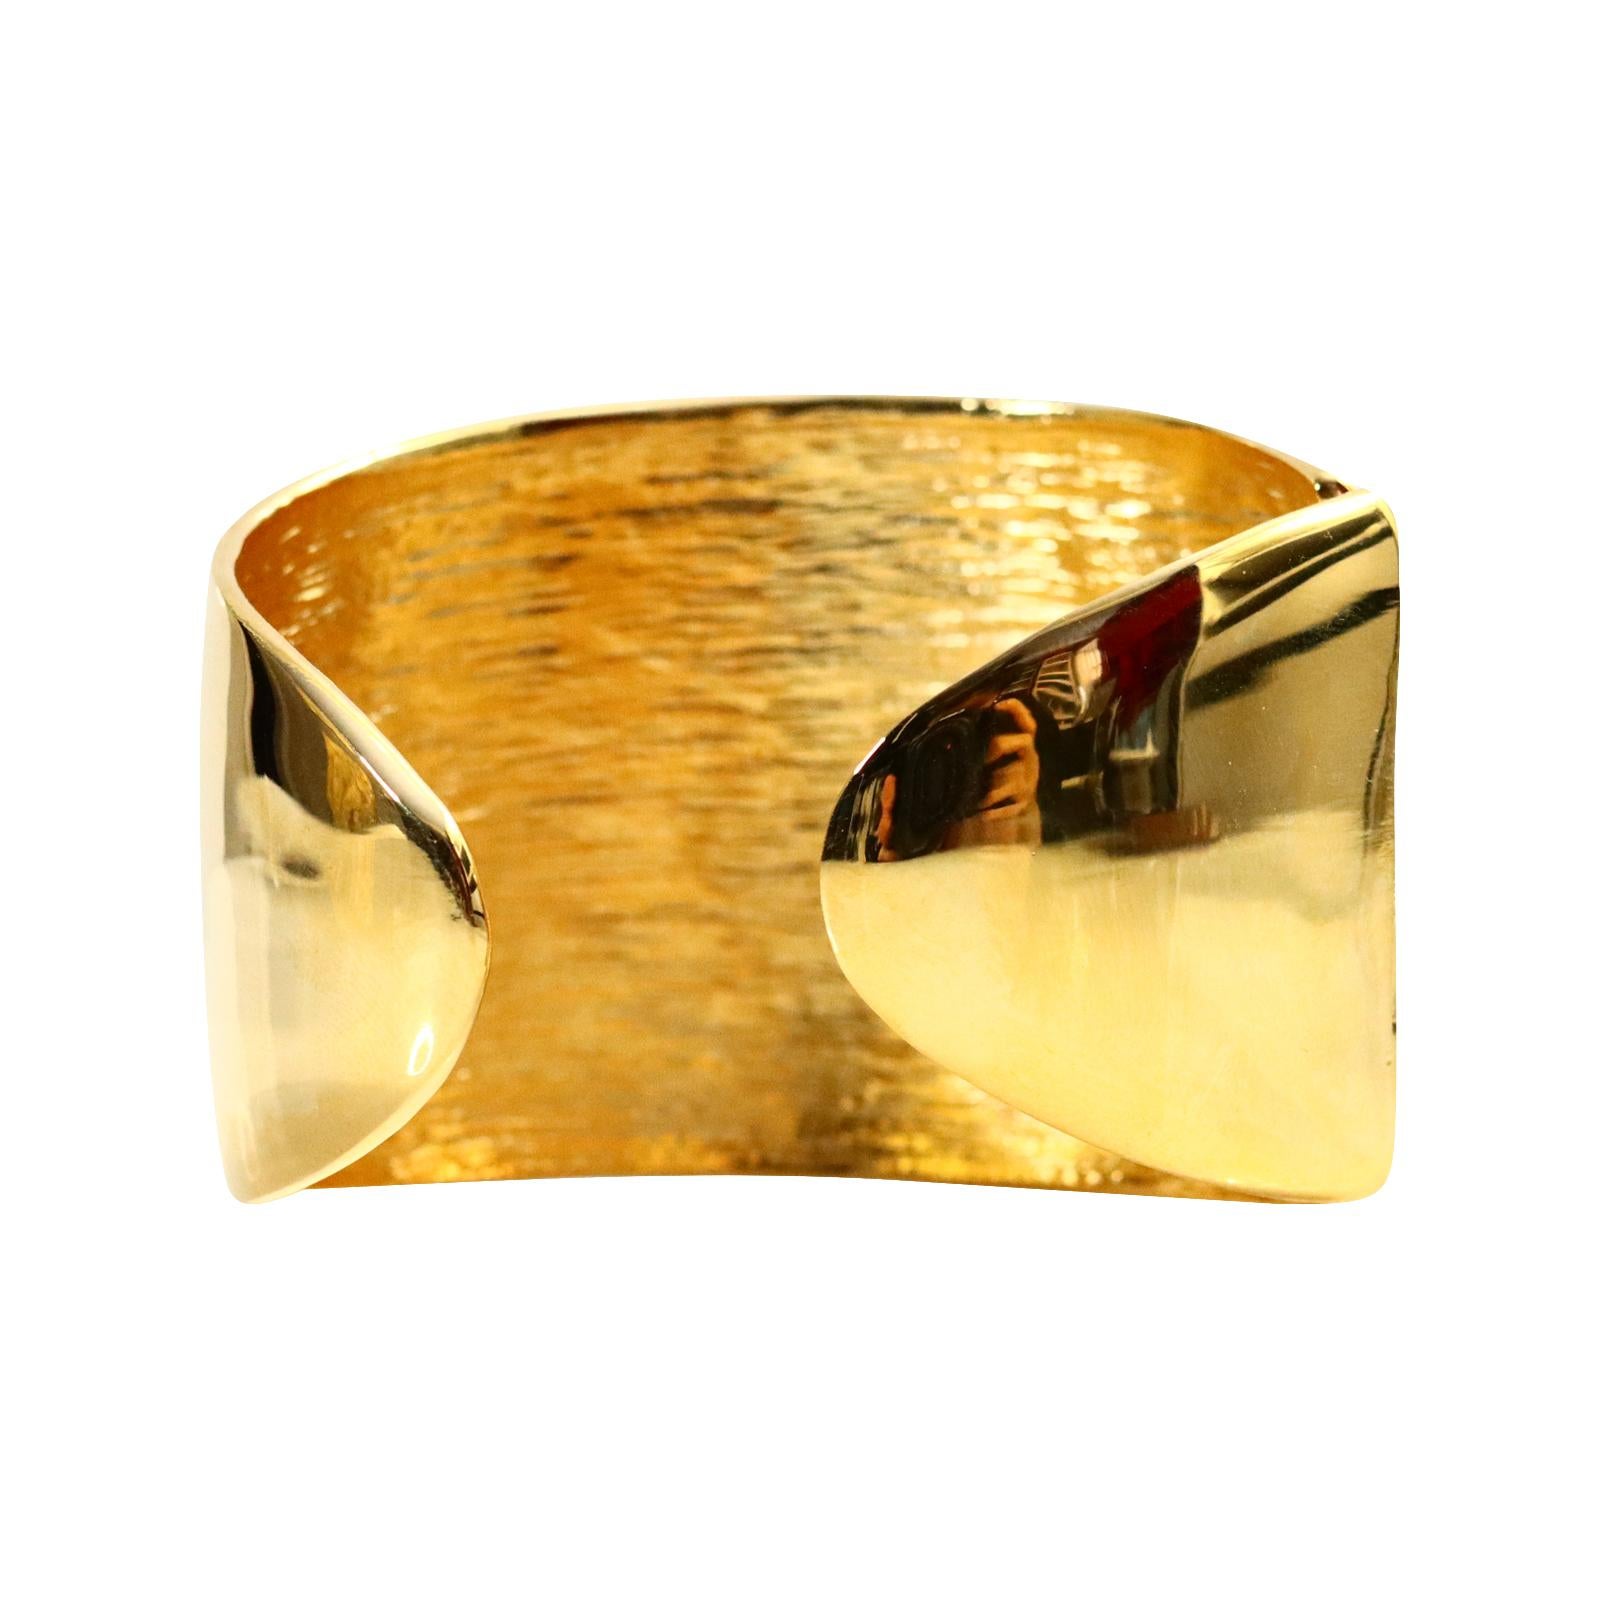 Modern Collectible KJL Gold Bracelet Cuff with Silver Crystal Star, Circa 2000s For Sale